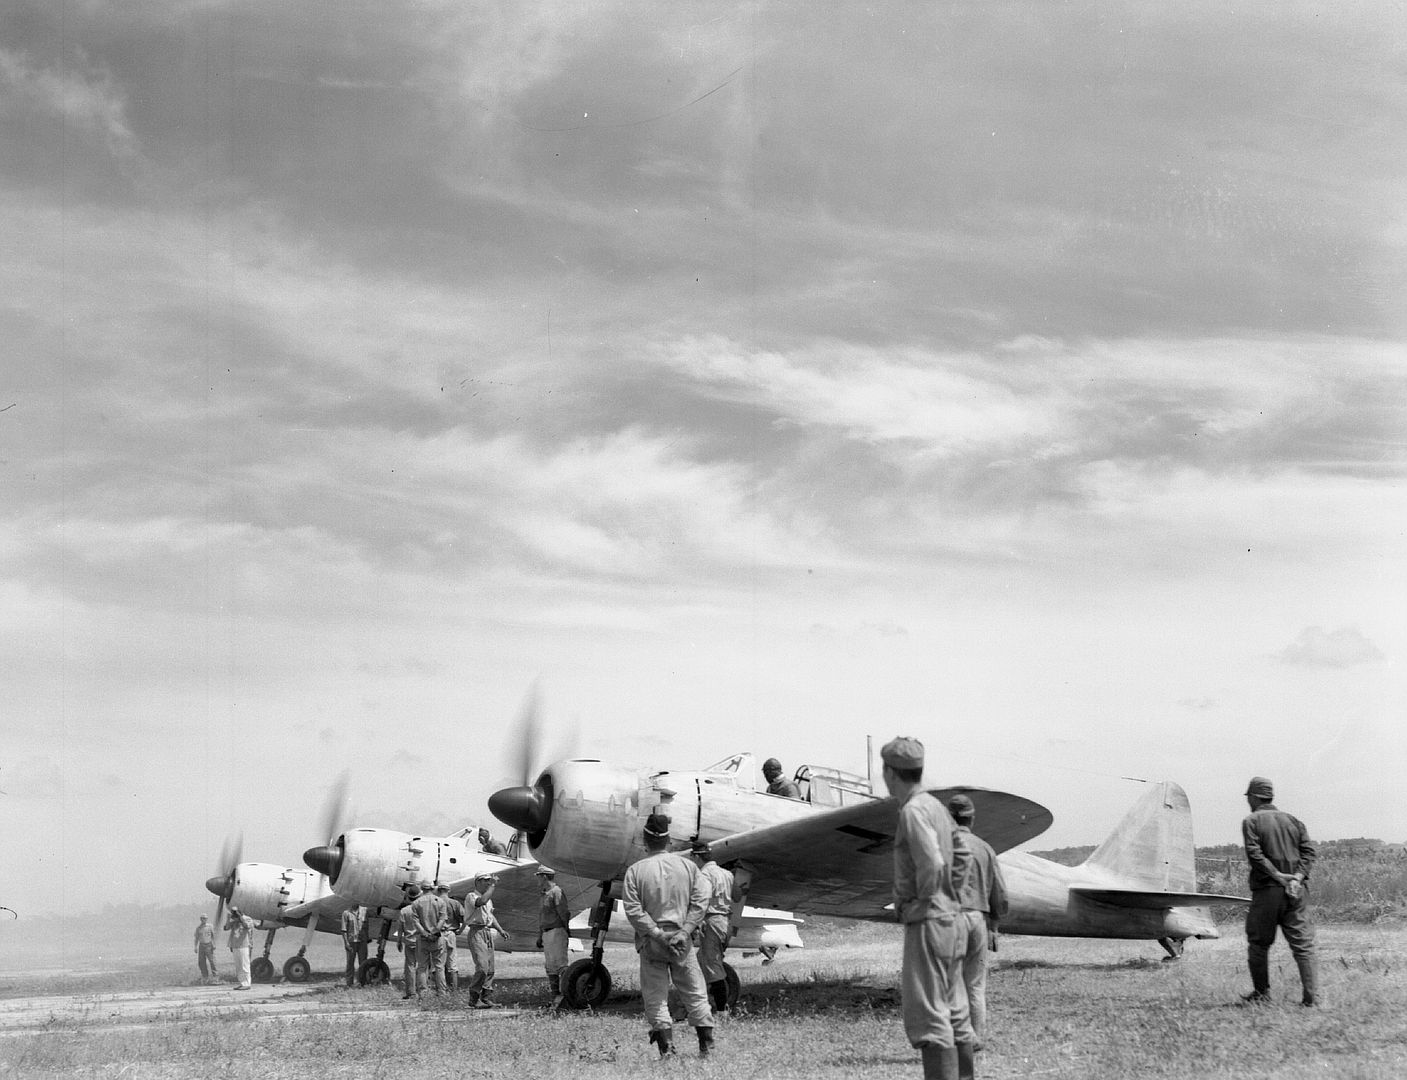 Japanese Mitsubishi A6M5 Reisen Zero Fighters With Their Engines Running About To Fly To Jacquinot Bay